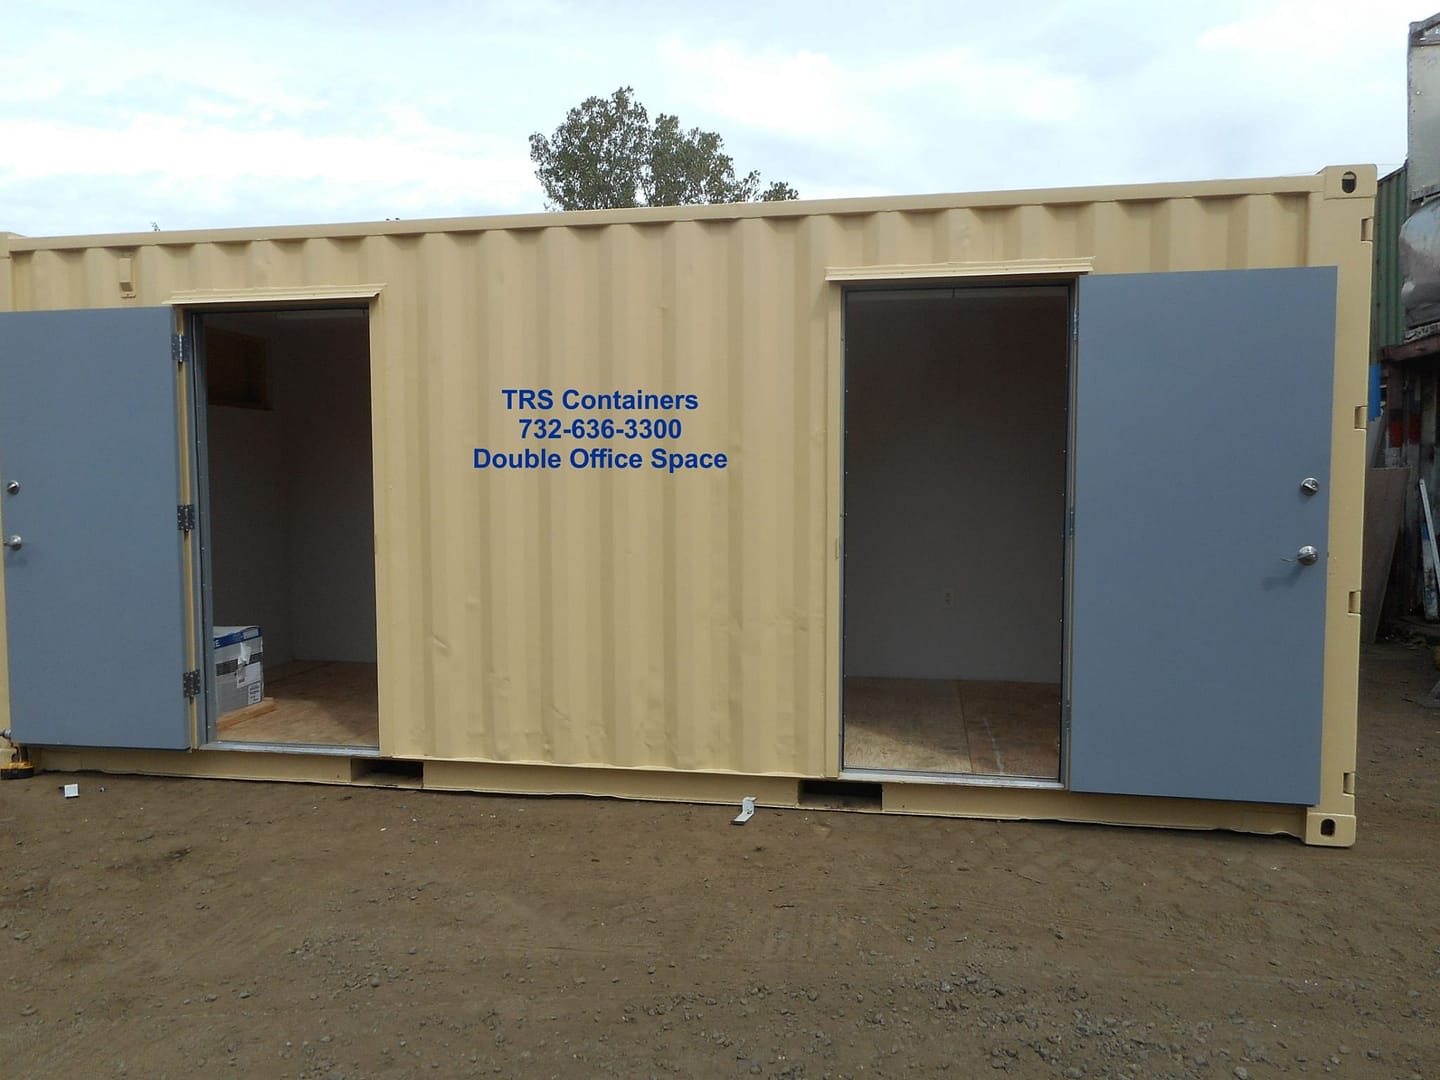 TRS fabrication work expands a containers functions with doors, electric, hvac and privacy